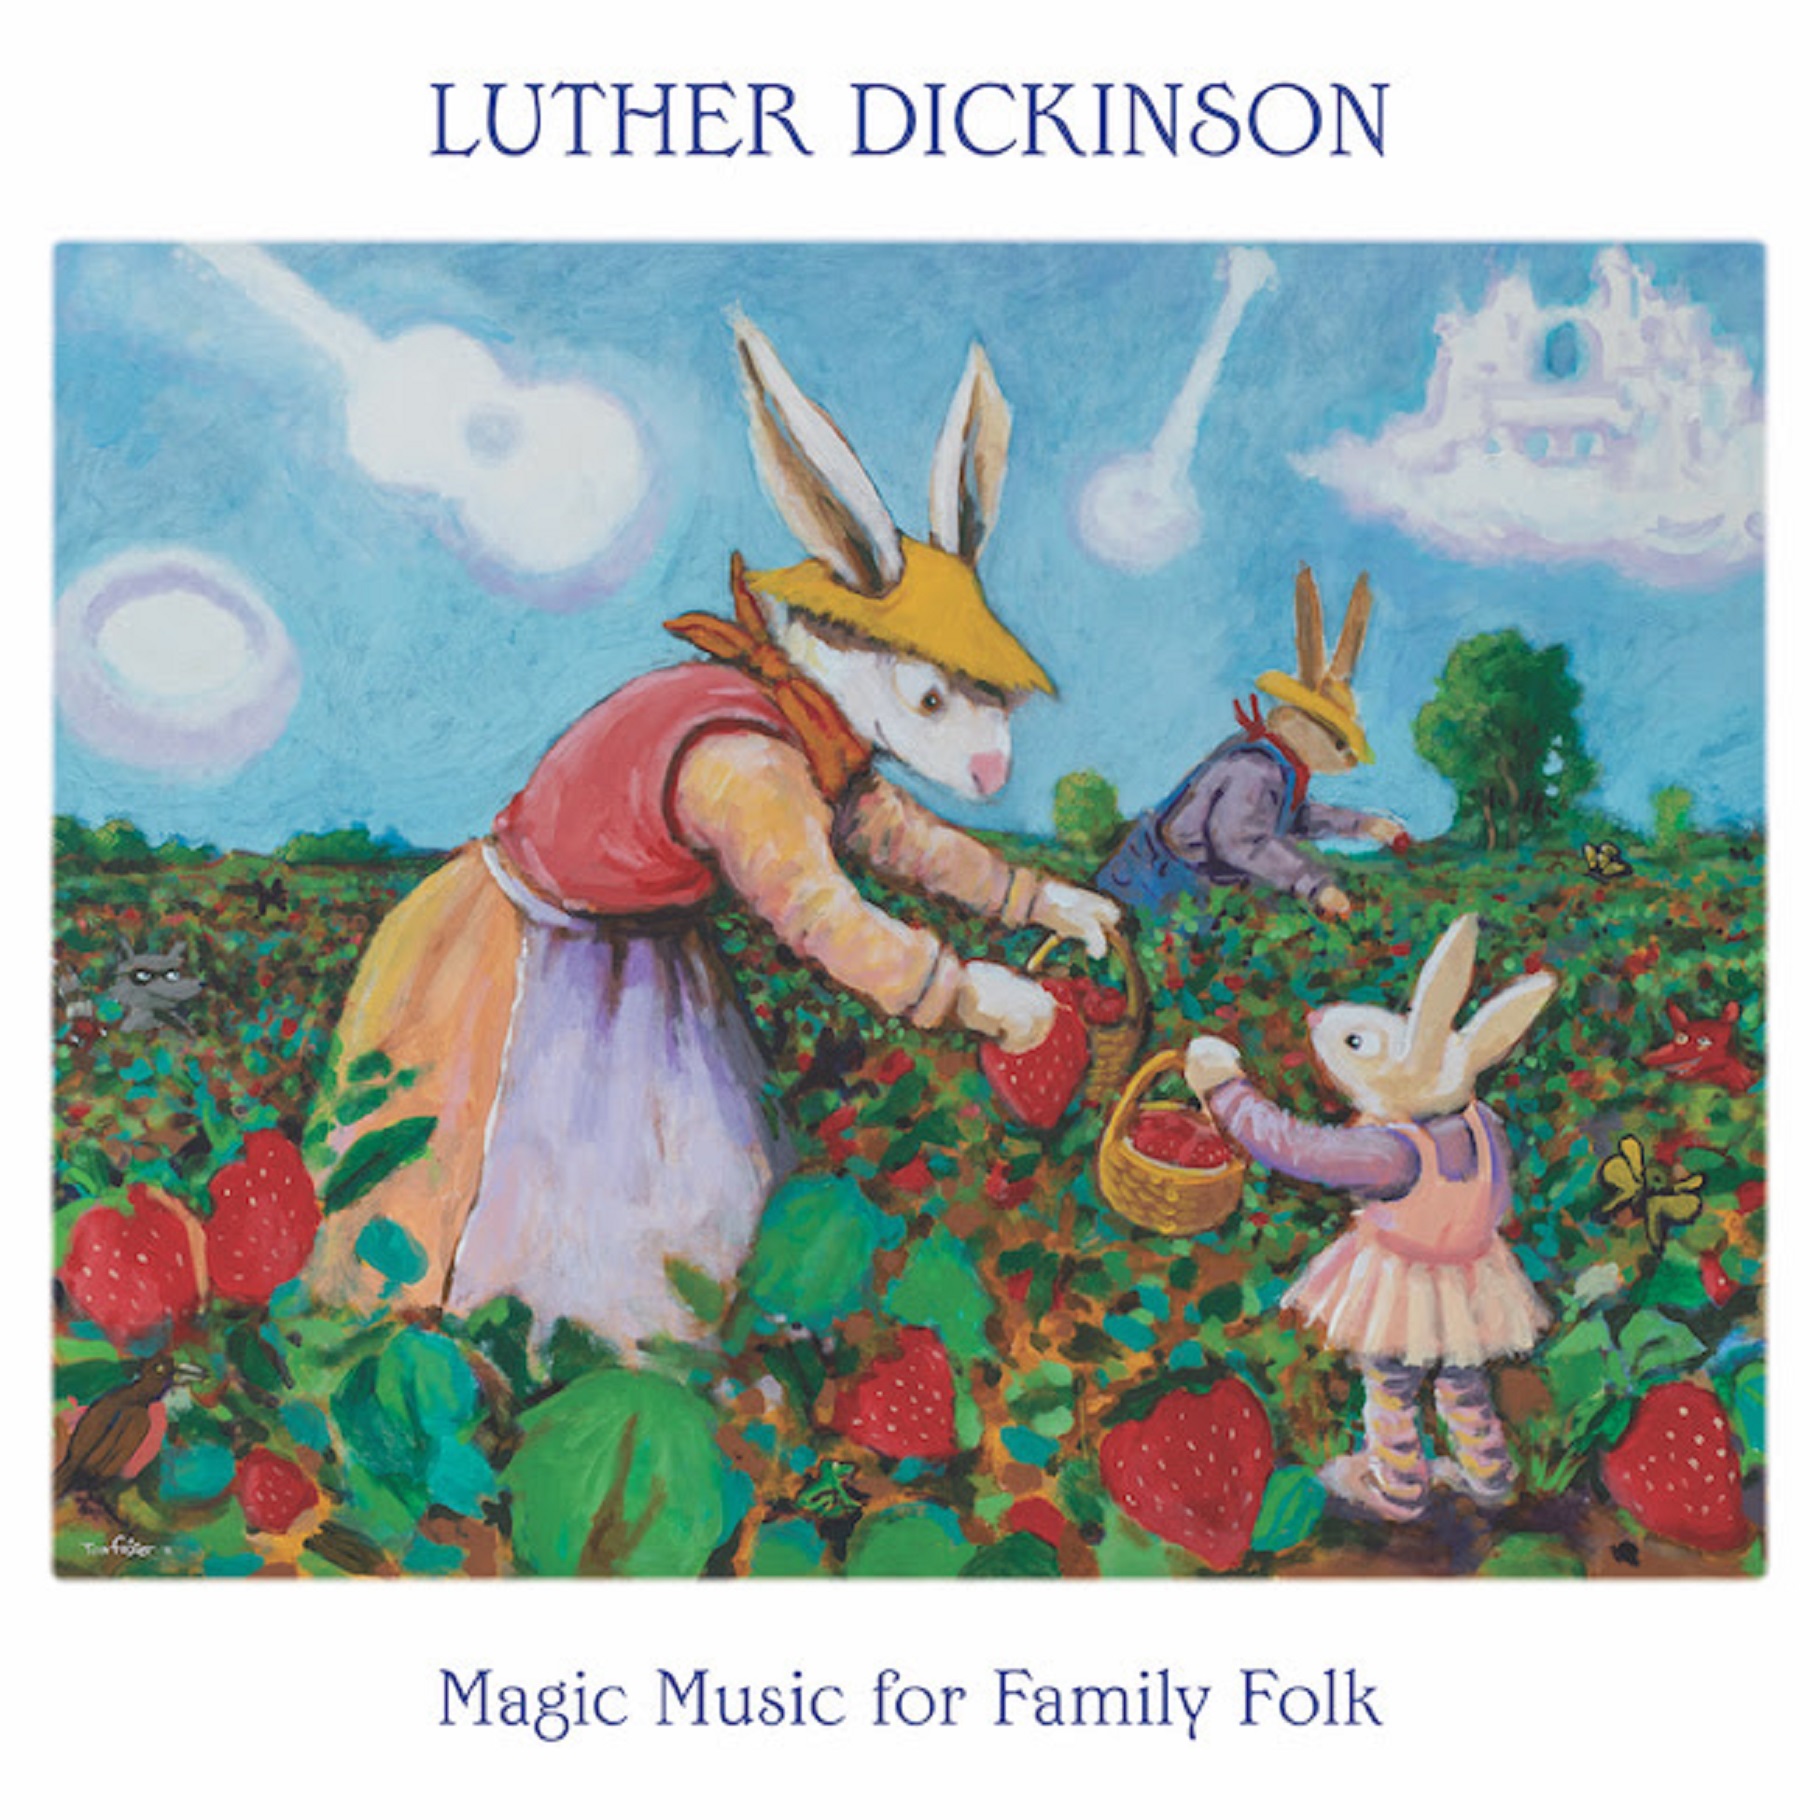 Luther Dickinson Releases "Magic Music for Family Folk"